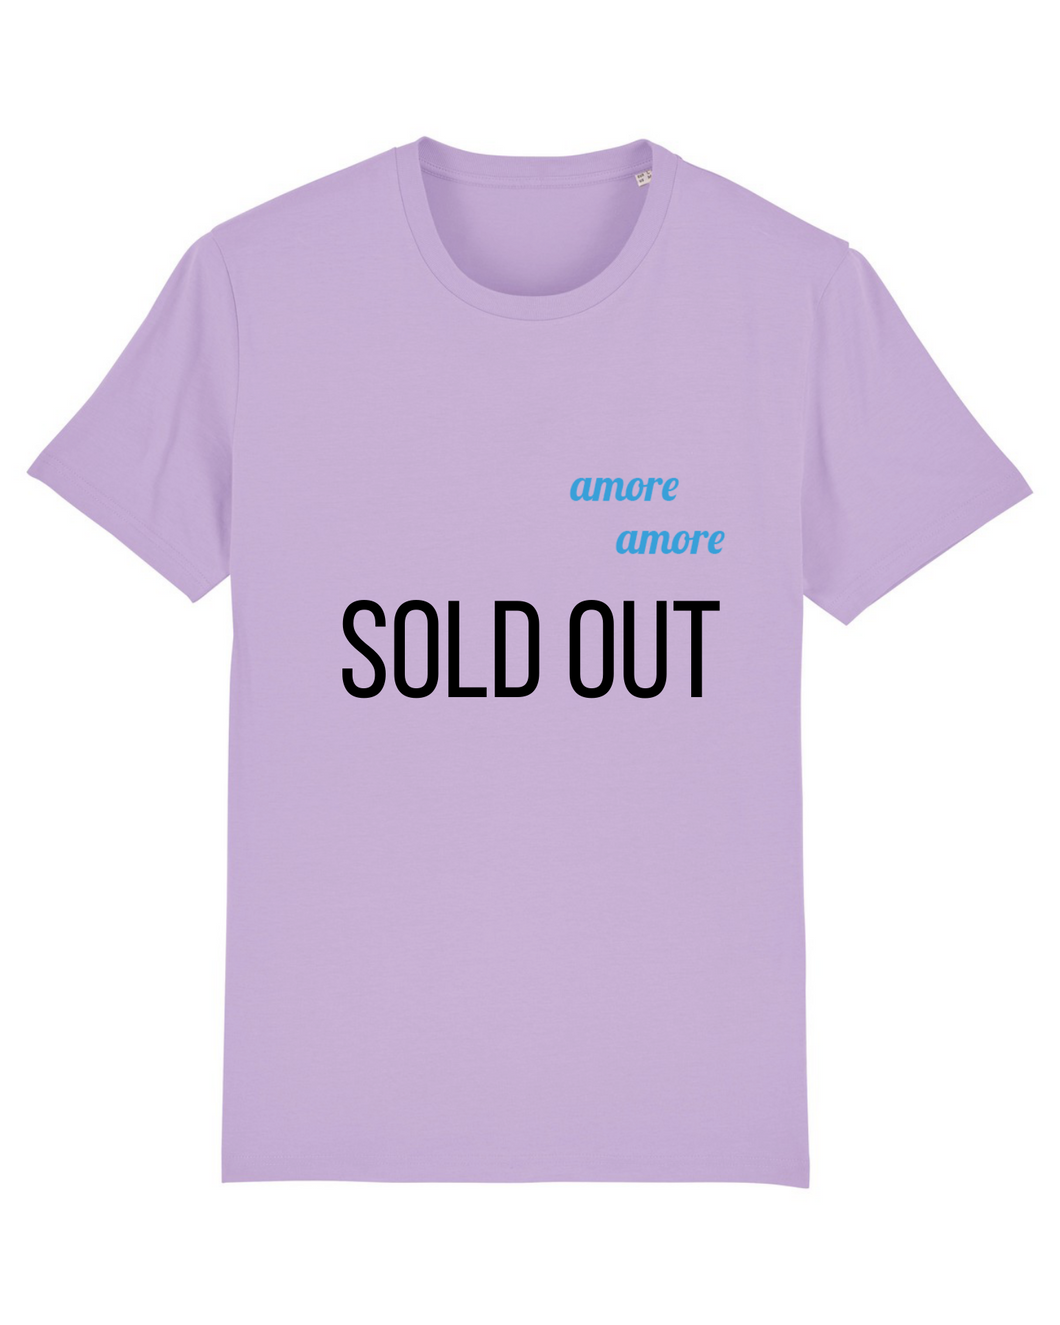 Amore for Terry - T-Shirt - lavender